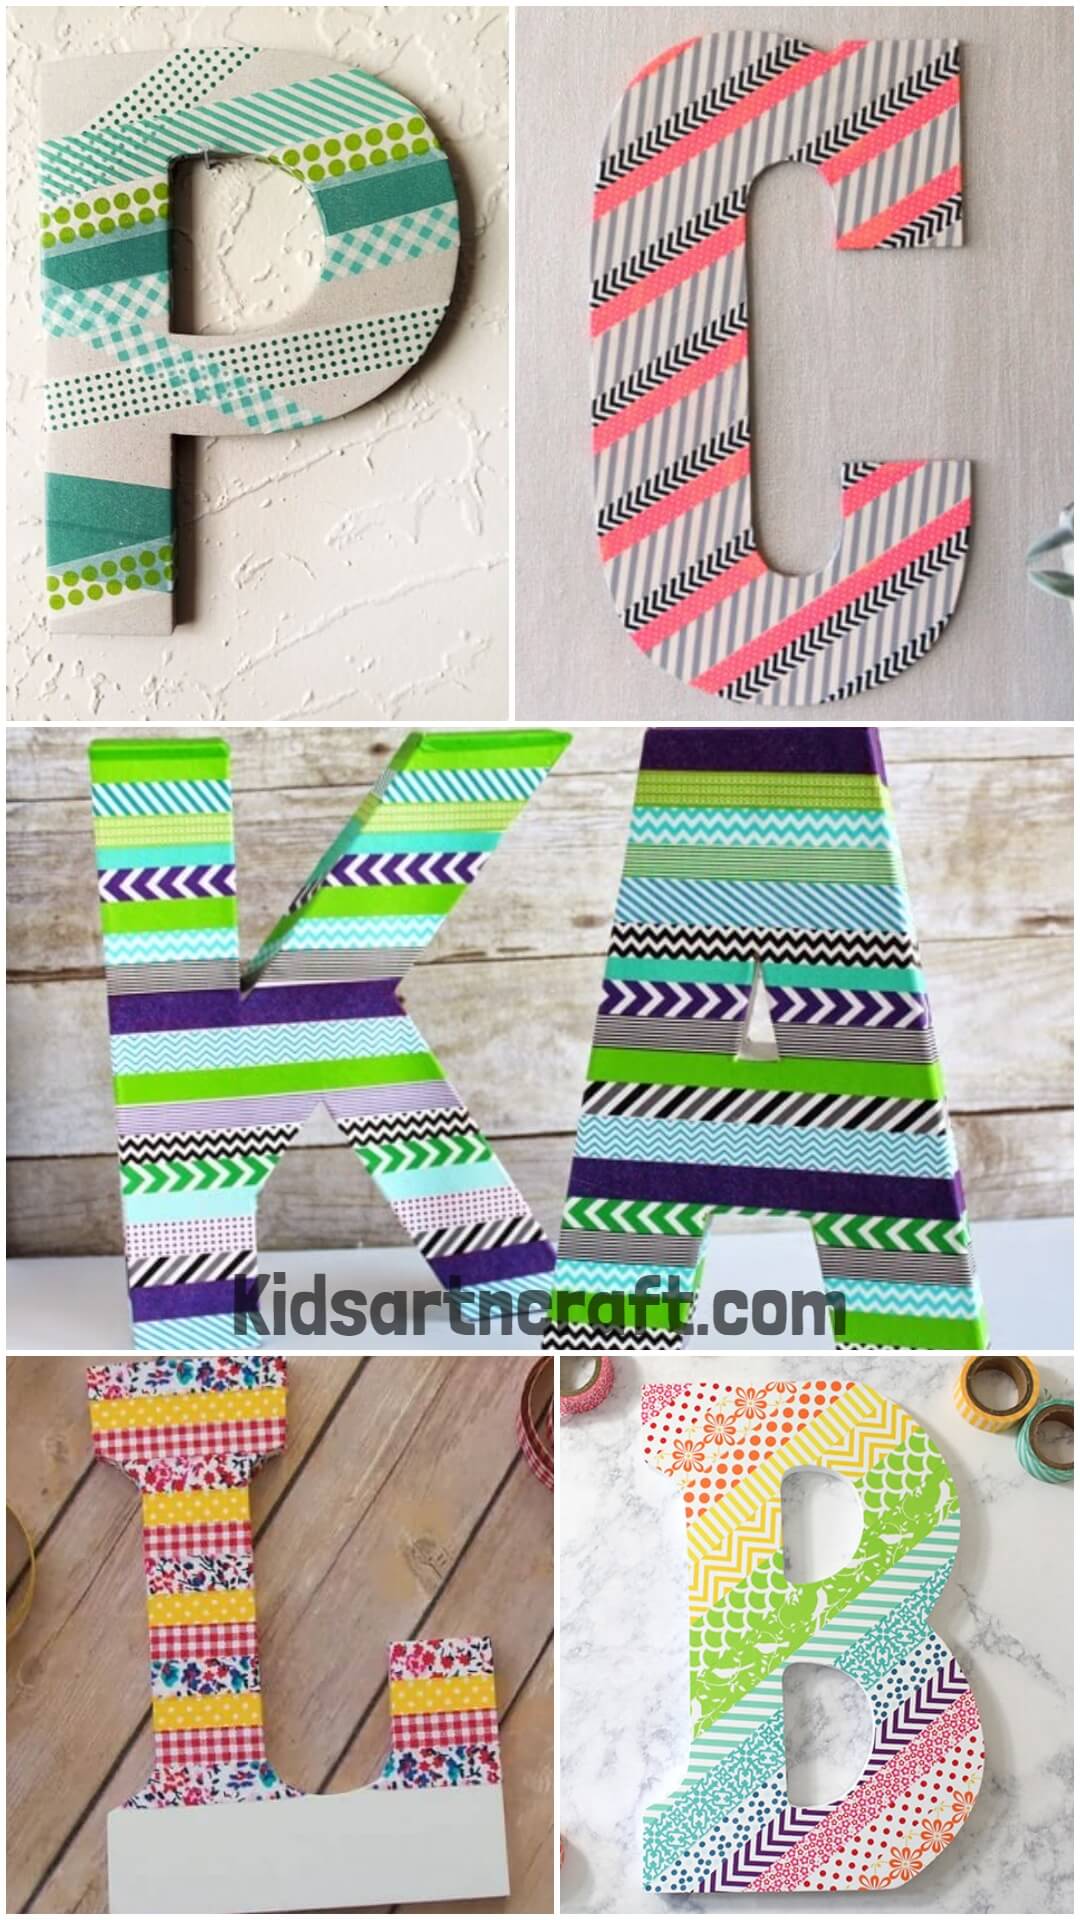 How to Make a Decorative Washi Tape Letter 